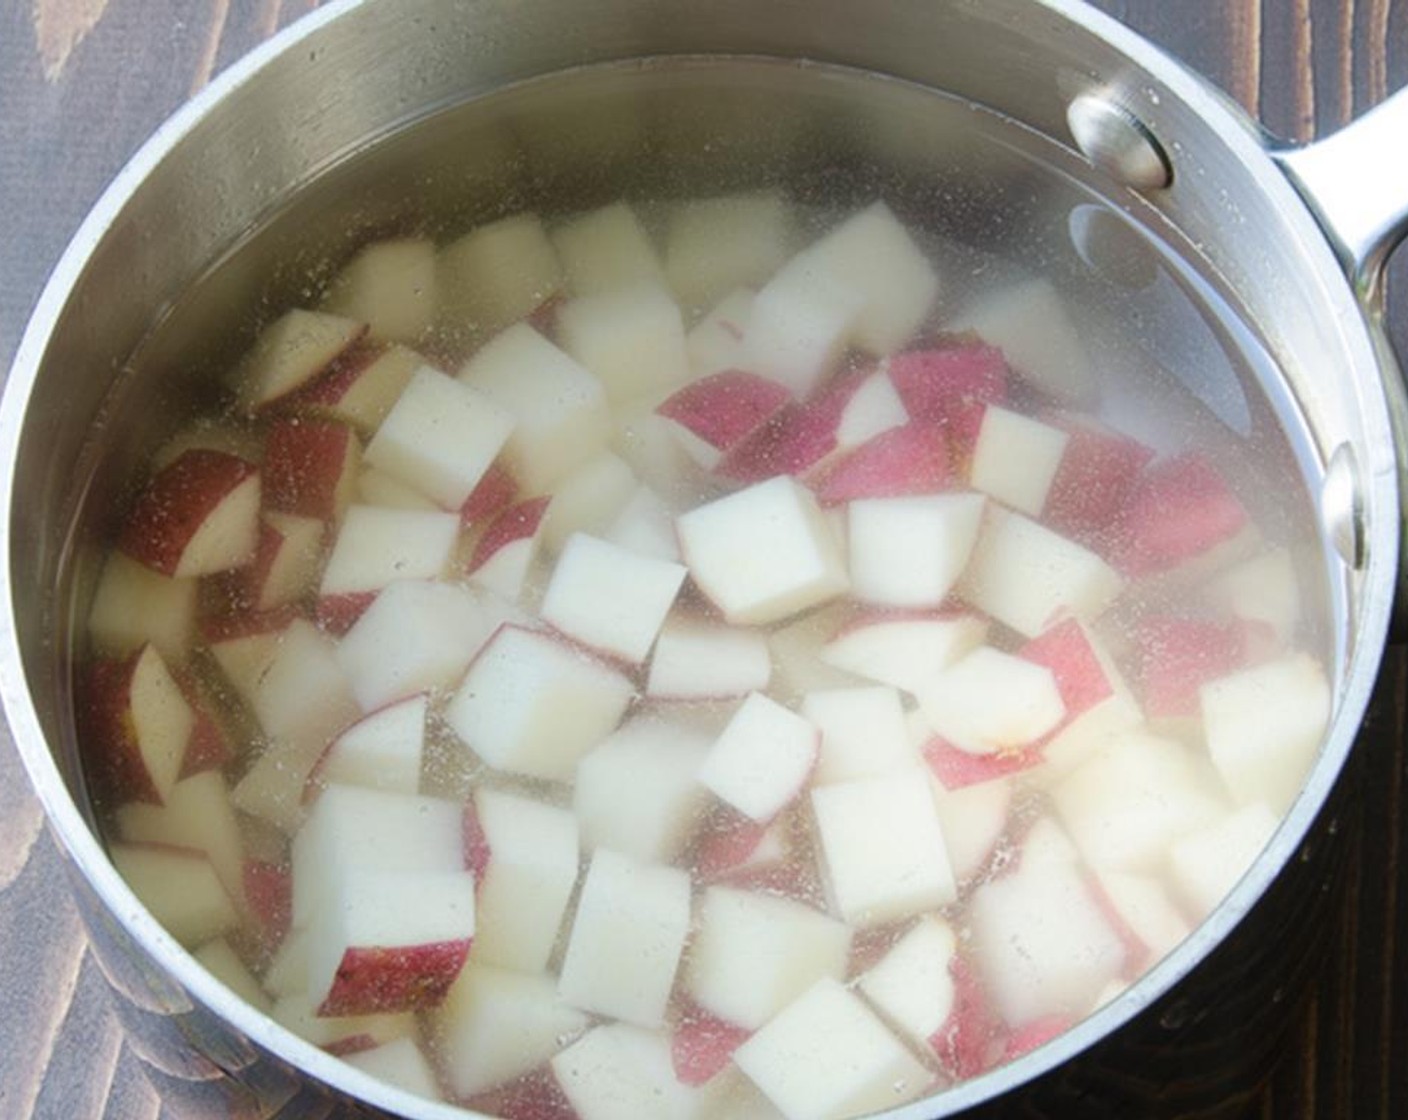 step 6 Add the potatoes to a small pan of water and bring to a boil. Reduce heat to simmer and cook until potatoes are tender, about 7 to 10 minutes. Drain potatoes and set aside to cool.